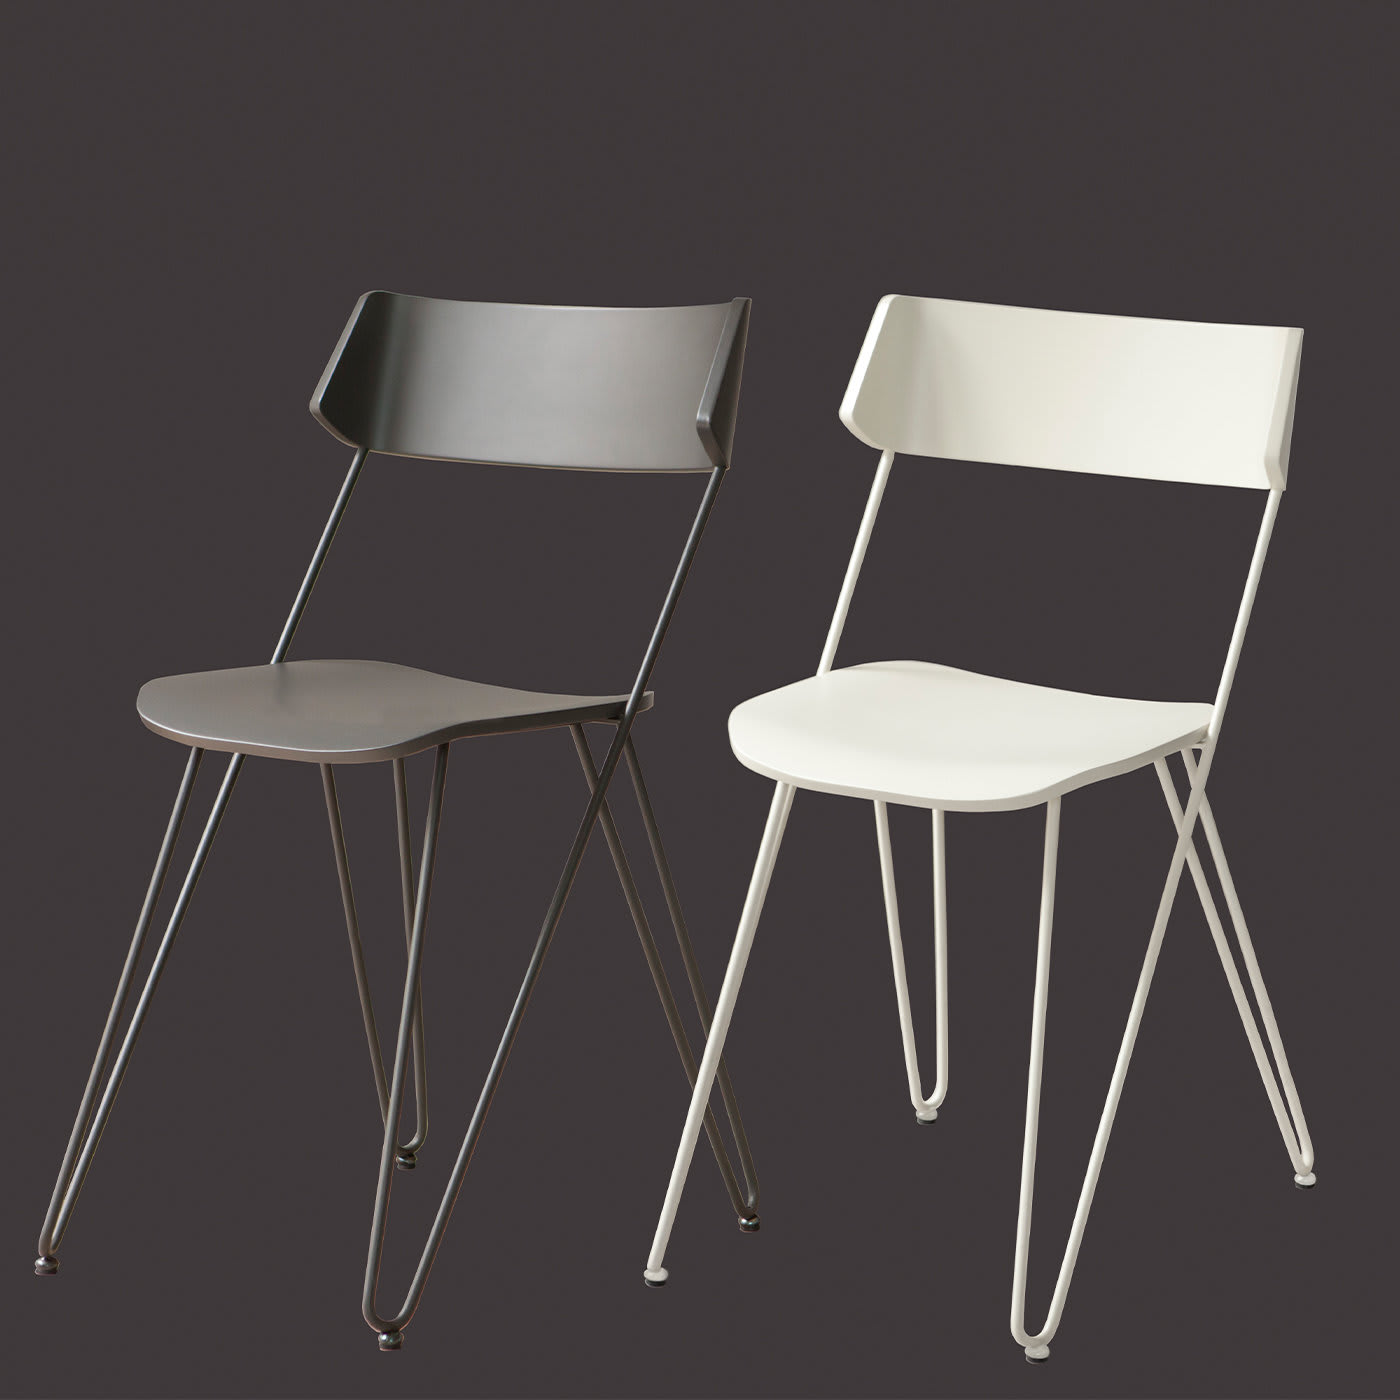 Ibsen White Chair - Greyge